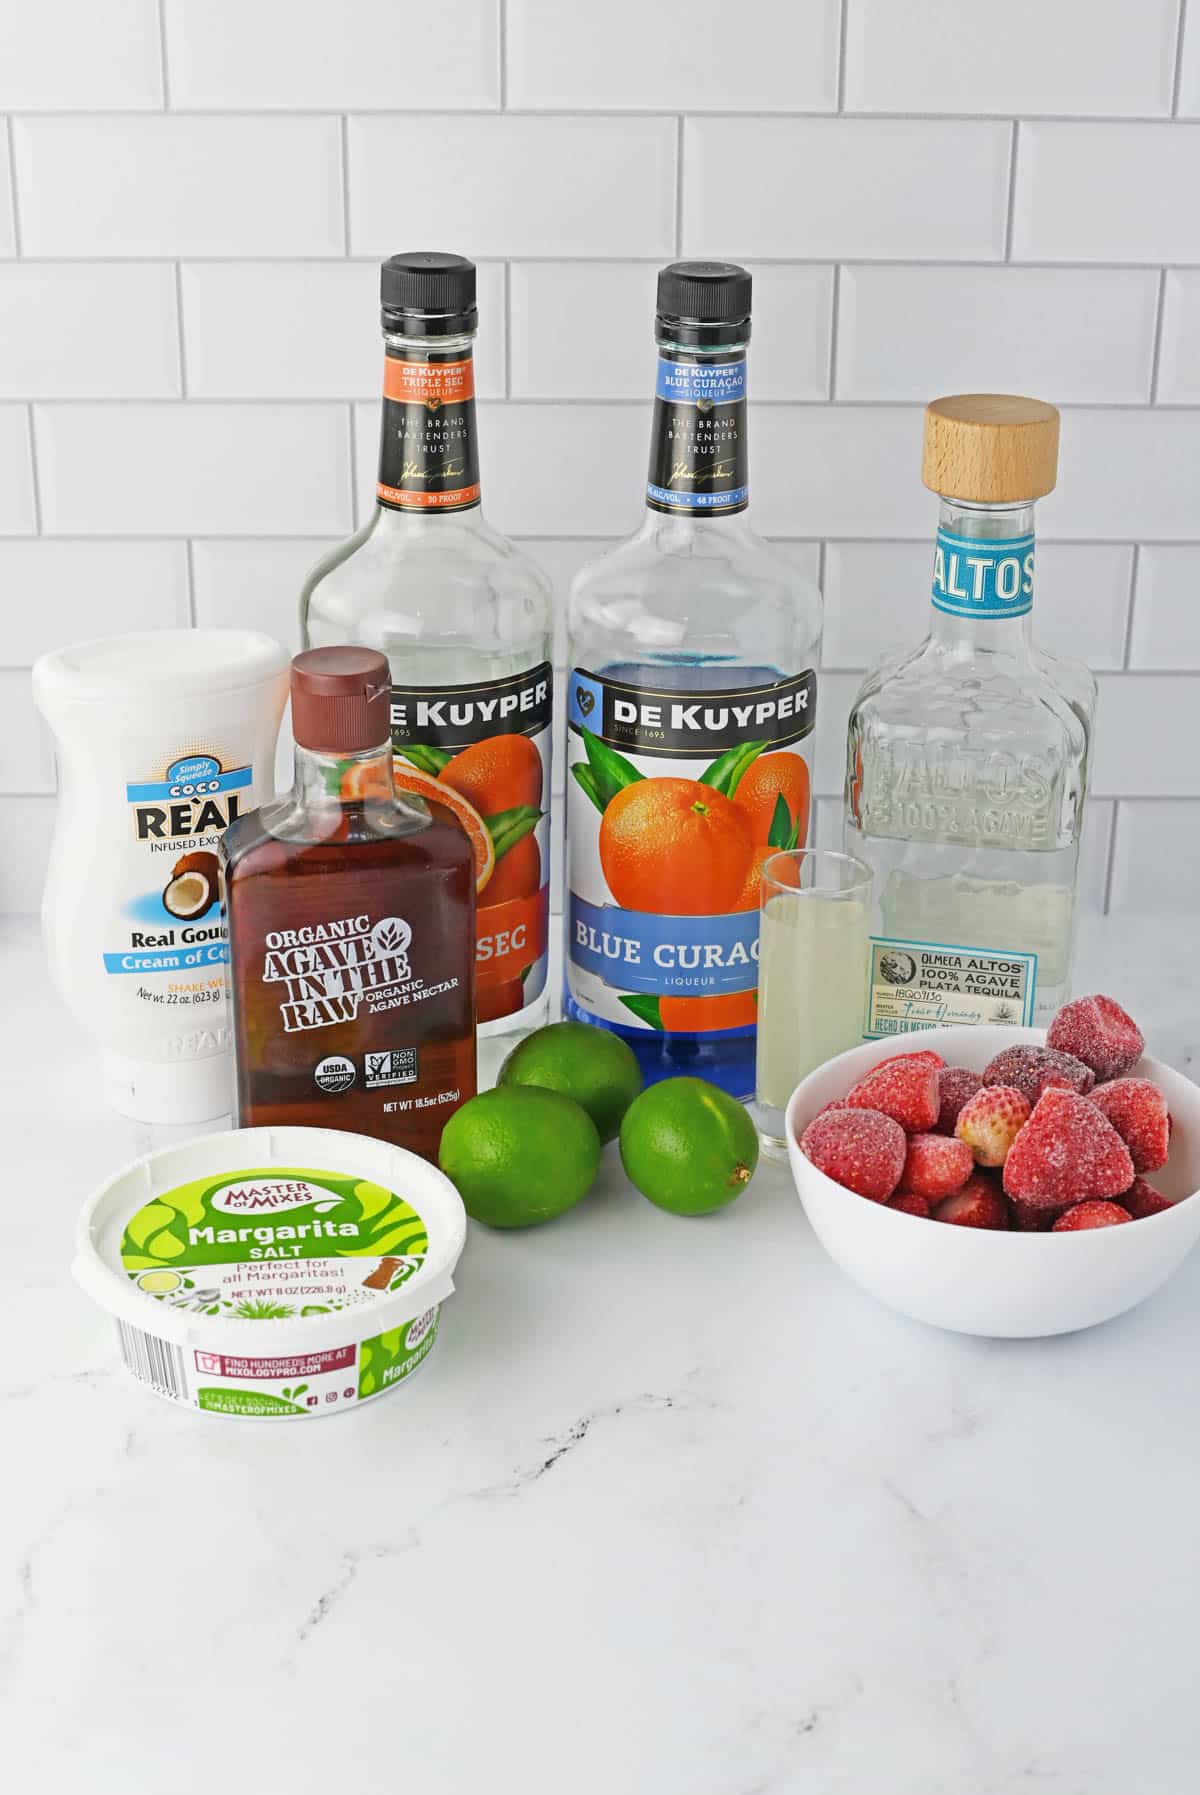 liqueur bottles with cream of coconut, agave and lines, margarita salt and frozen strawberries on counter